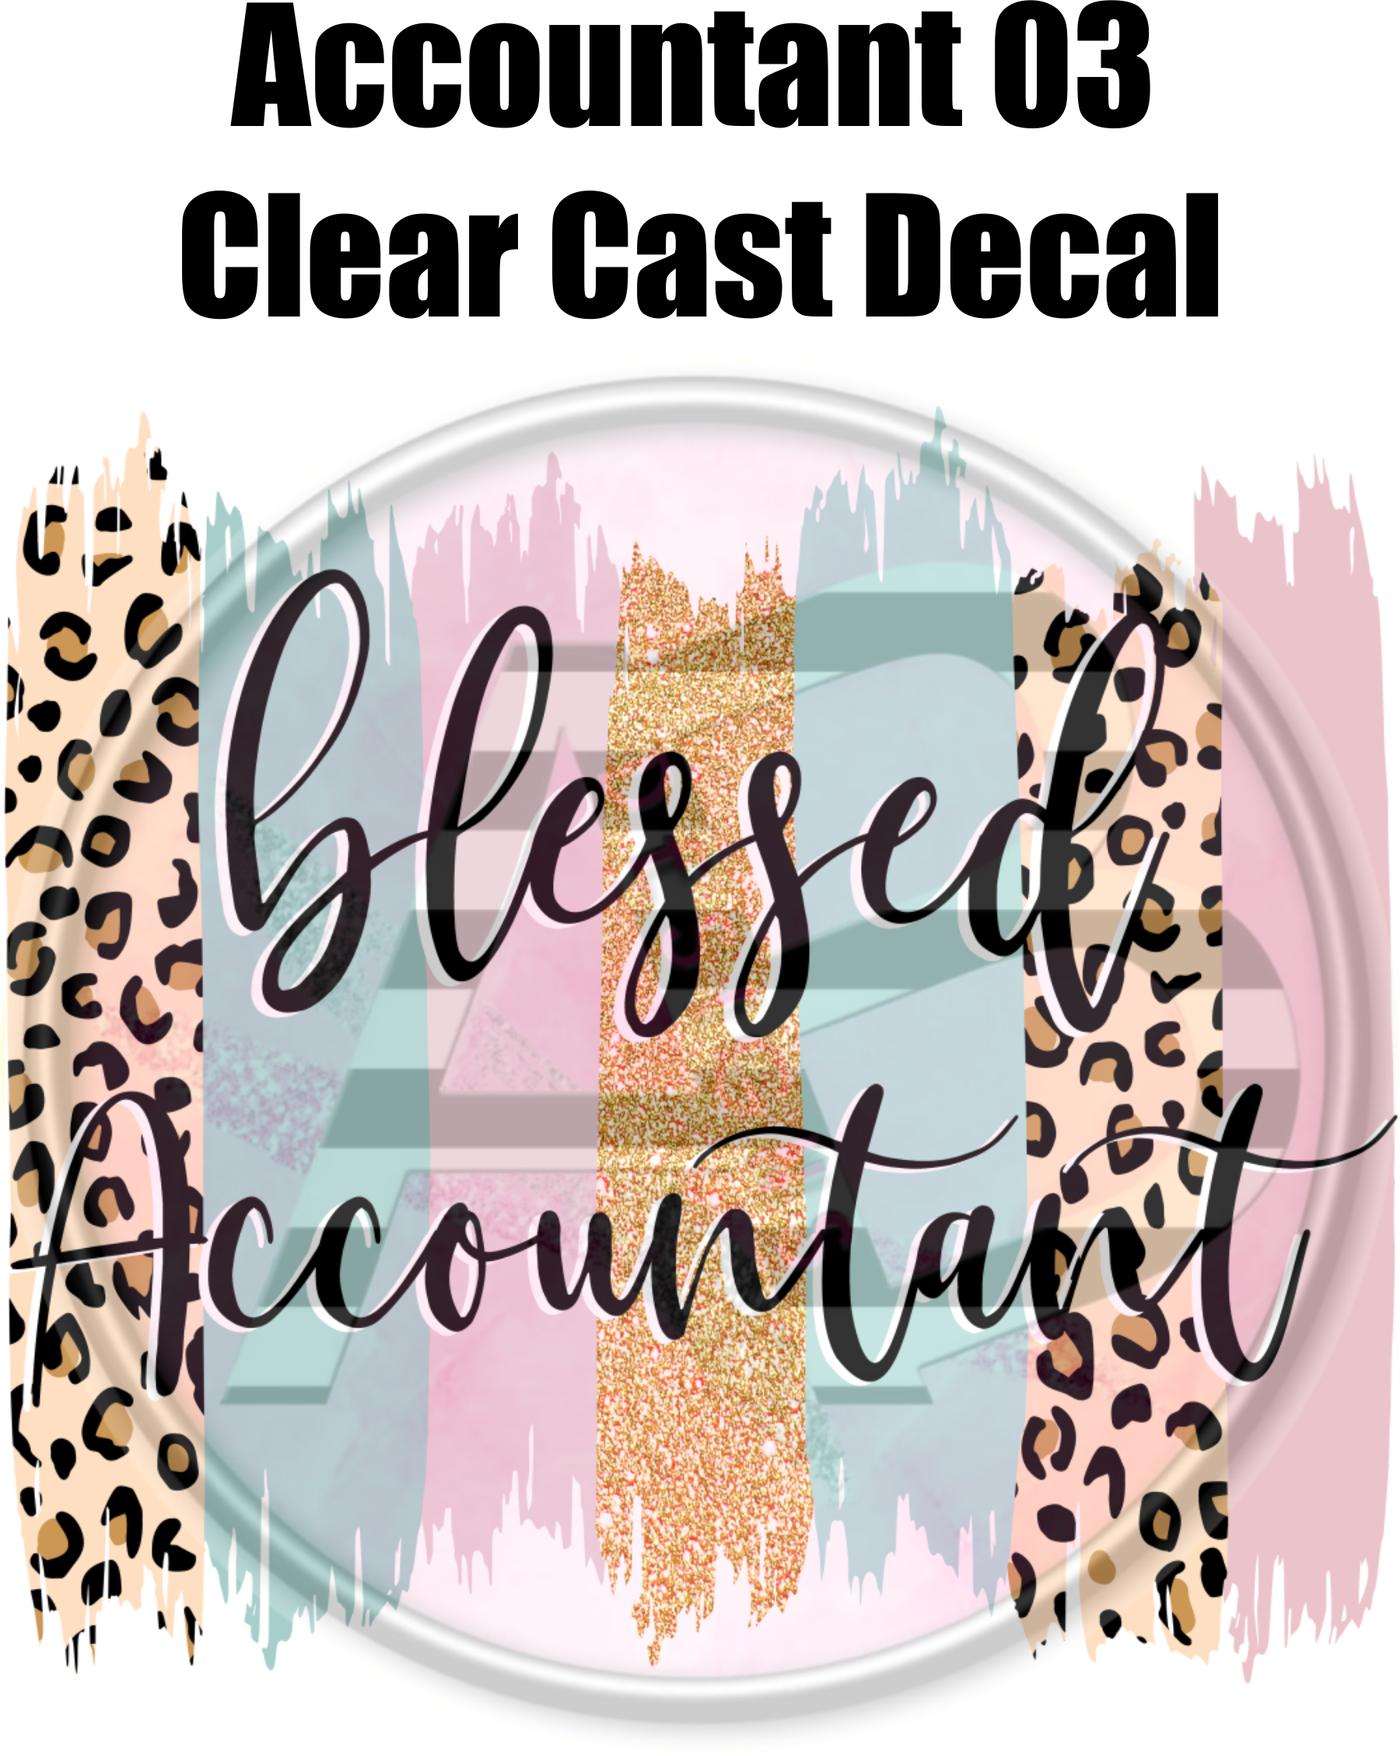 Accountant 03 - Clear Cast Decal